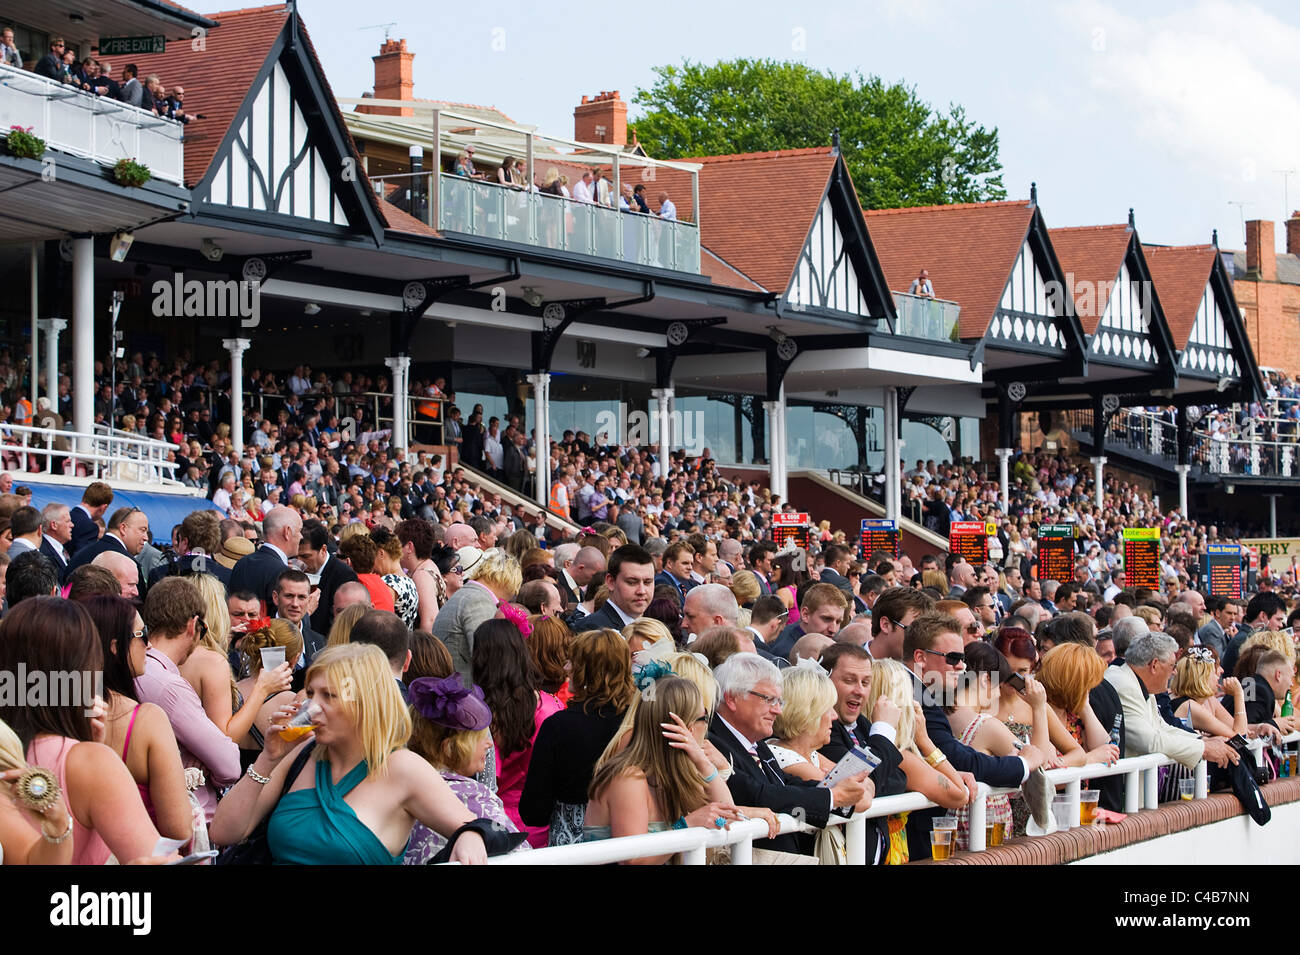 England, Cheshire, Chester. Spectators at Chester Racecourse Stock Photo